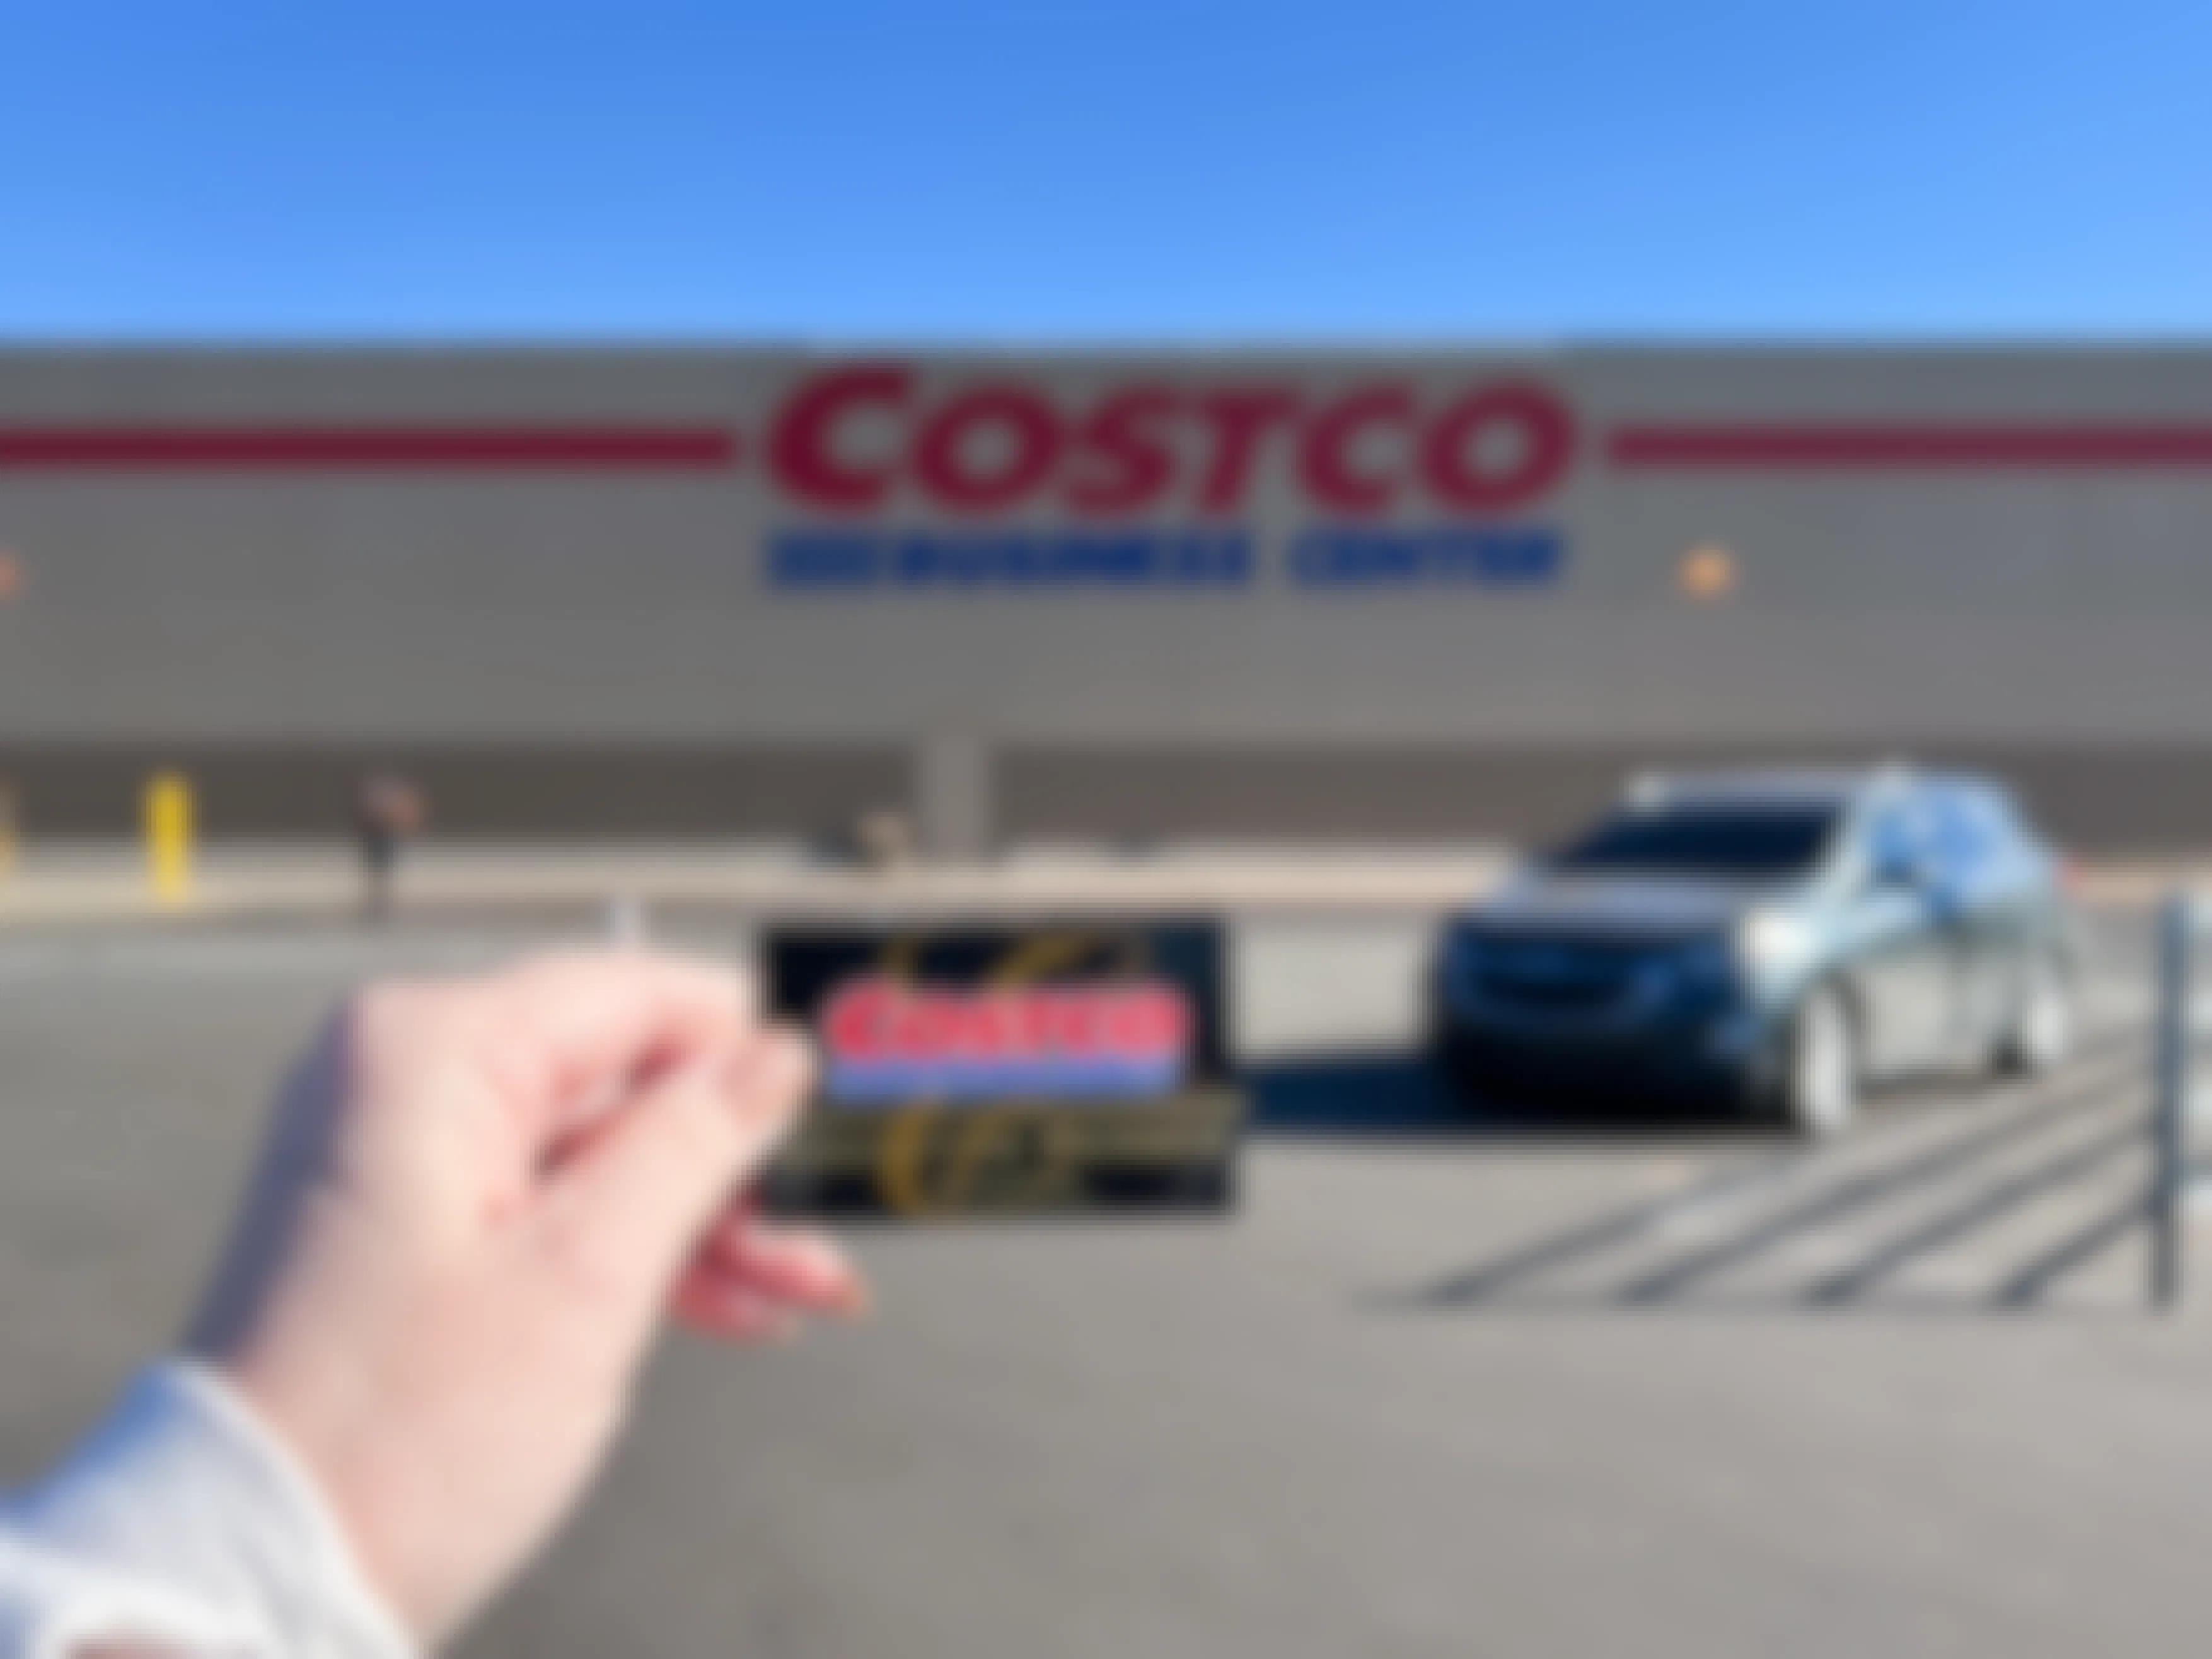 Someone holding up their Costco membership card in front of a Costco Business Center